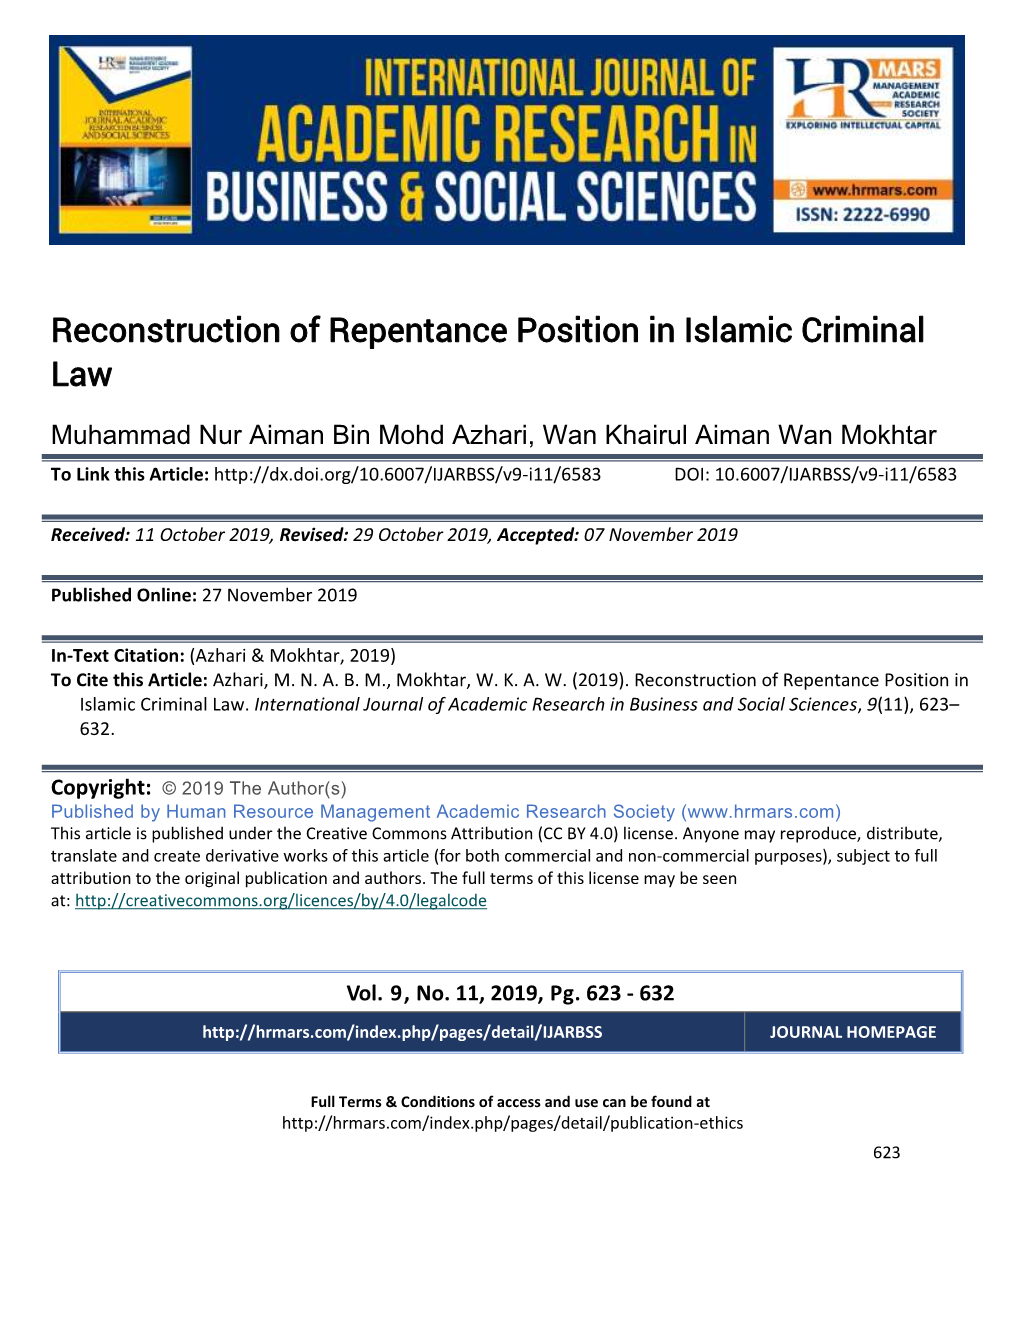 Reconstruction of Repentance Position in Islamic Criminal Law